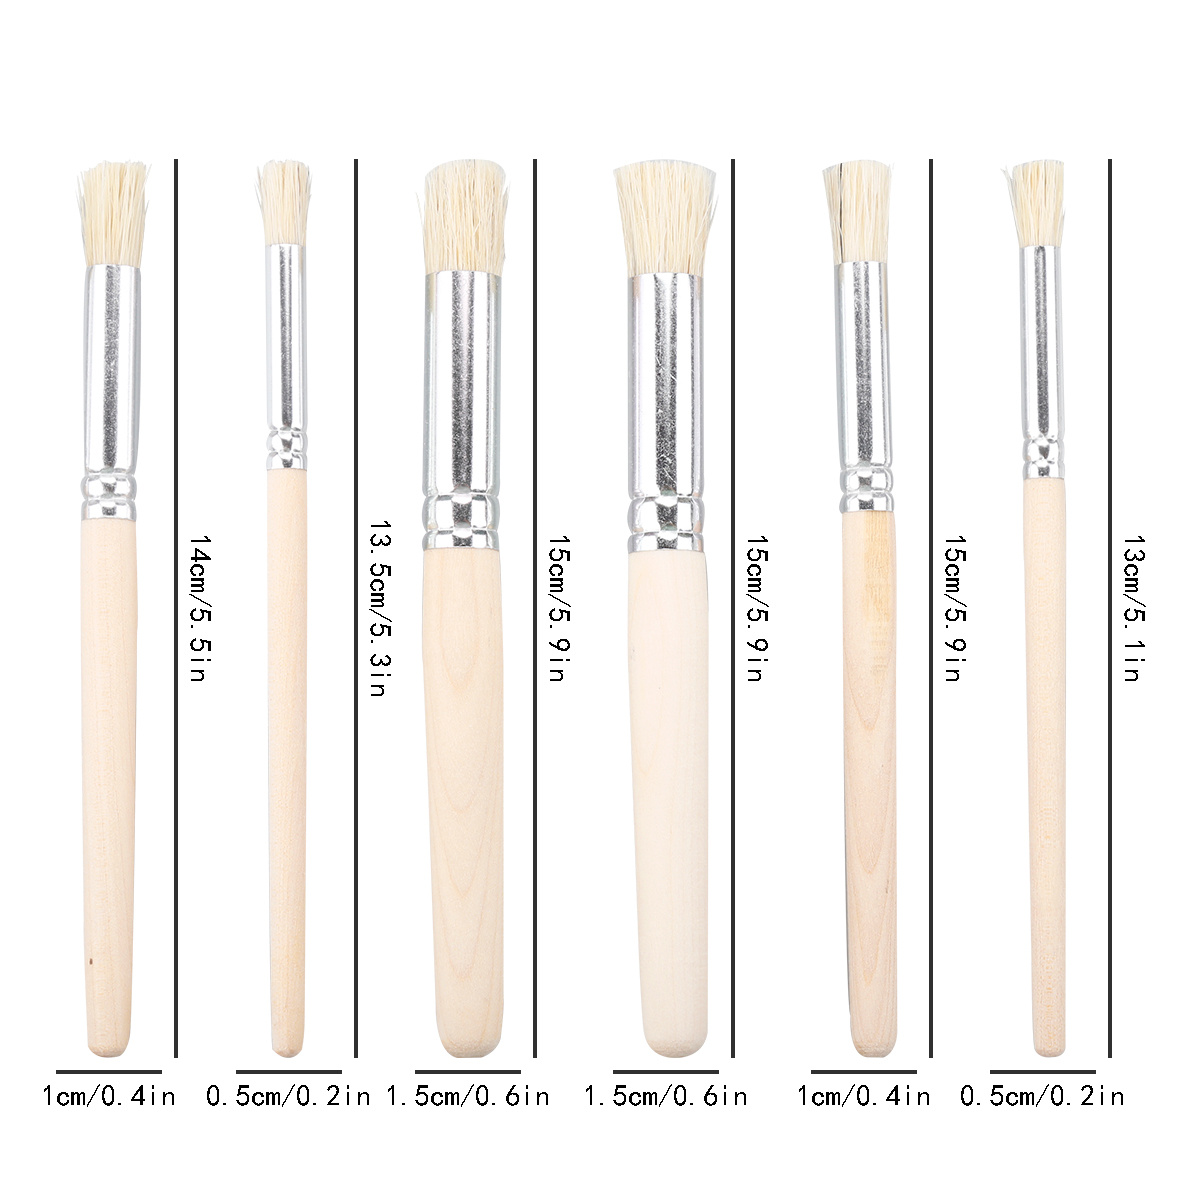  Stencil Brushes for Acrylic Paint, 6Pcs Wooden Handle Bristle  Brush Watercolor Paint Brushes Oil Painting Brush for DIY Crafts Card Making